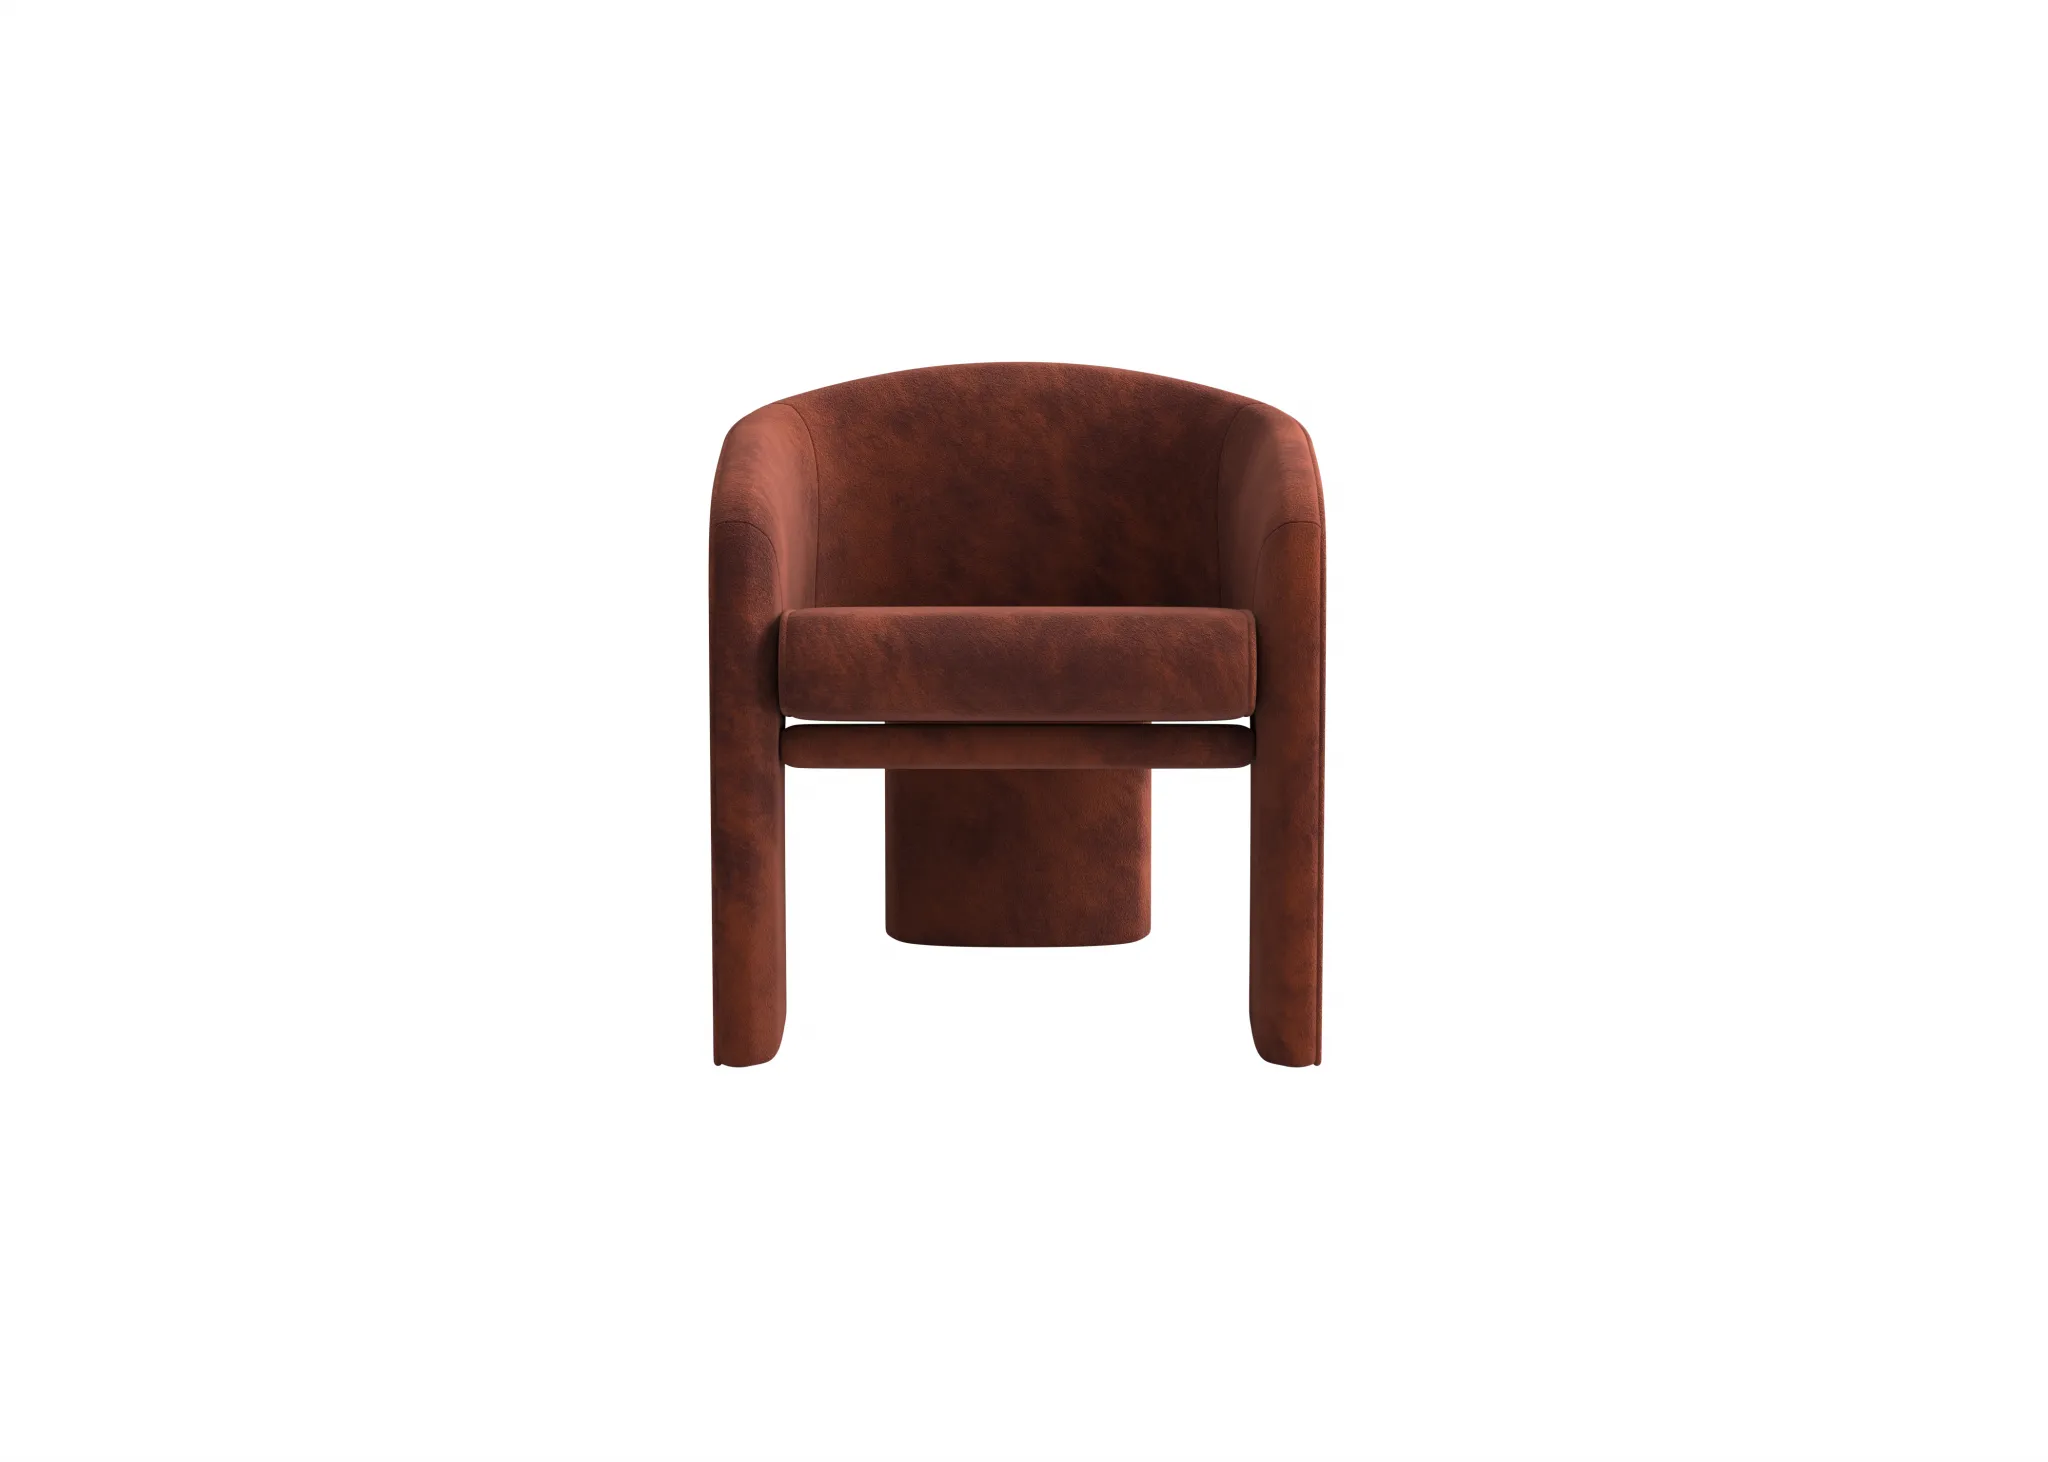 FURNITURE 3D MODELS – CHAIRS – 0134